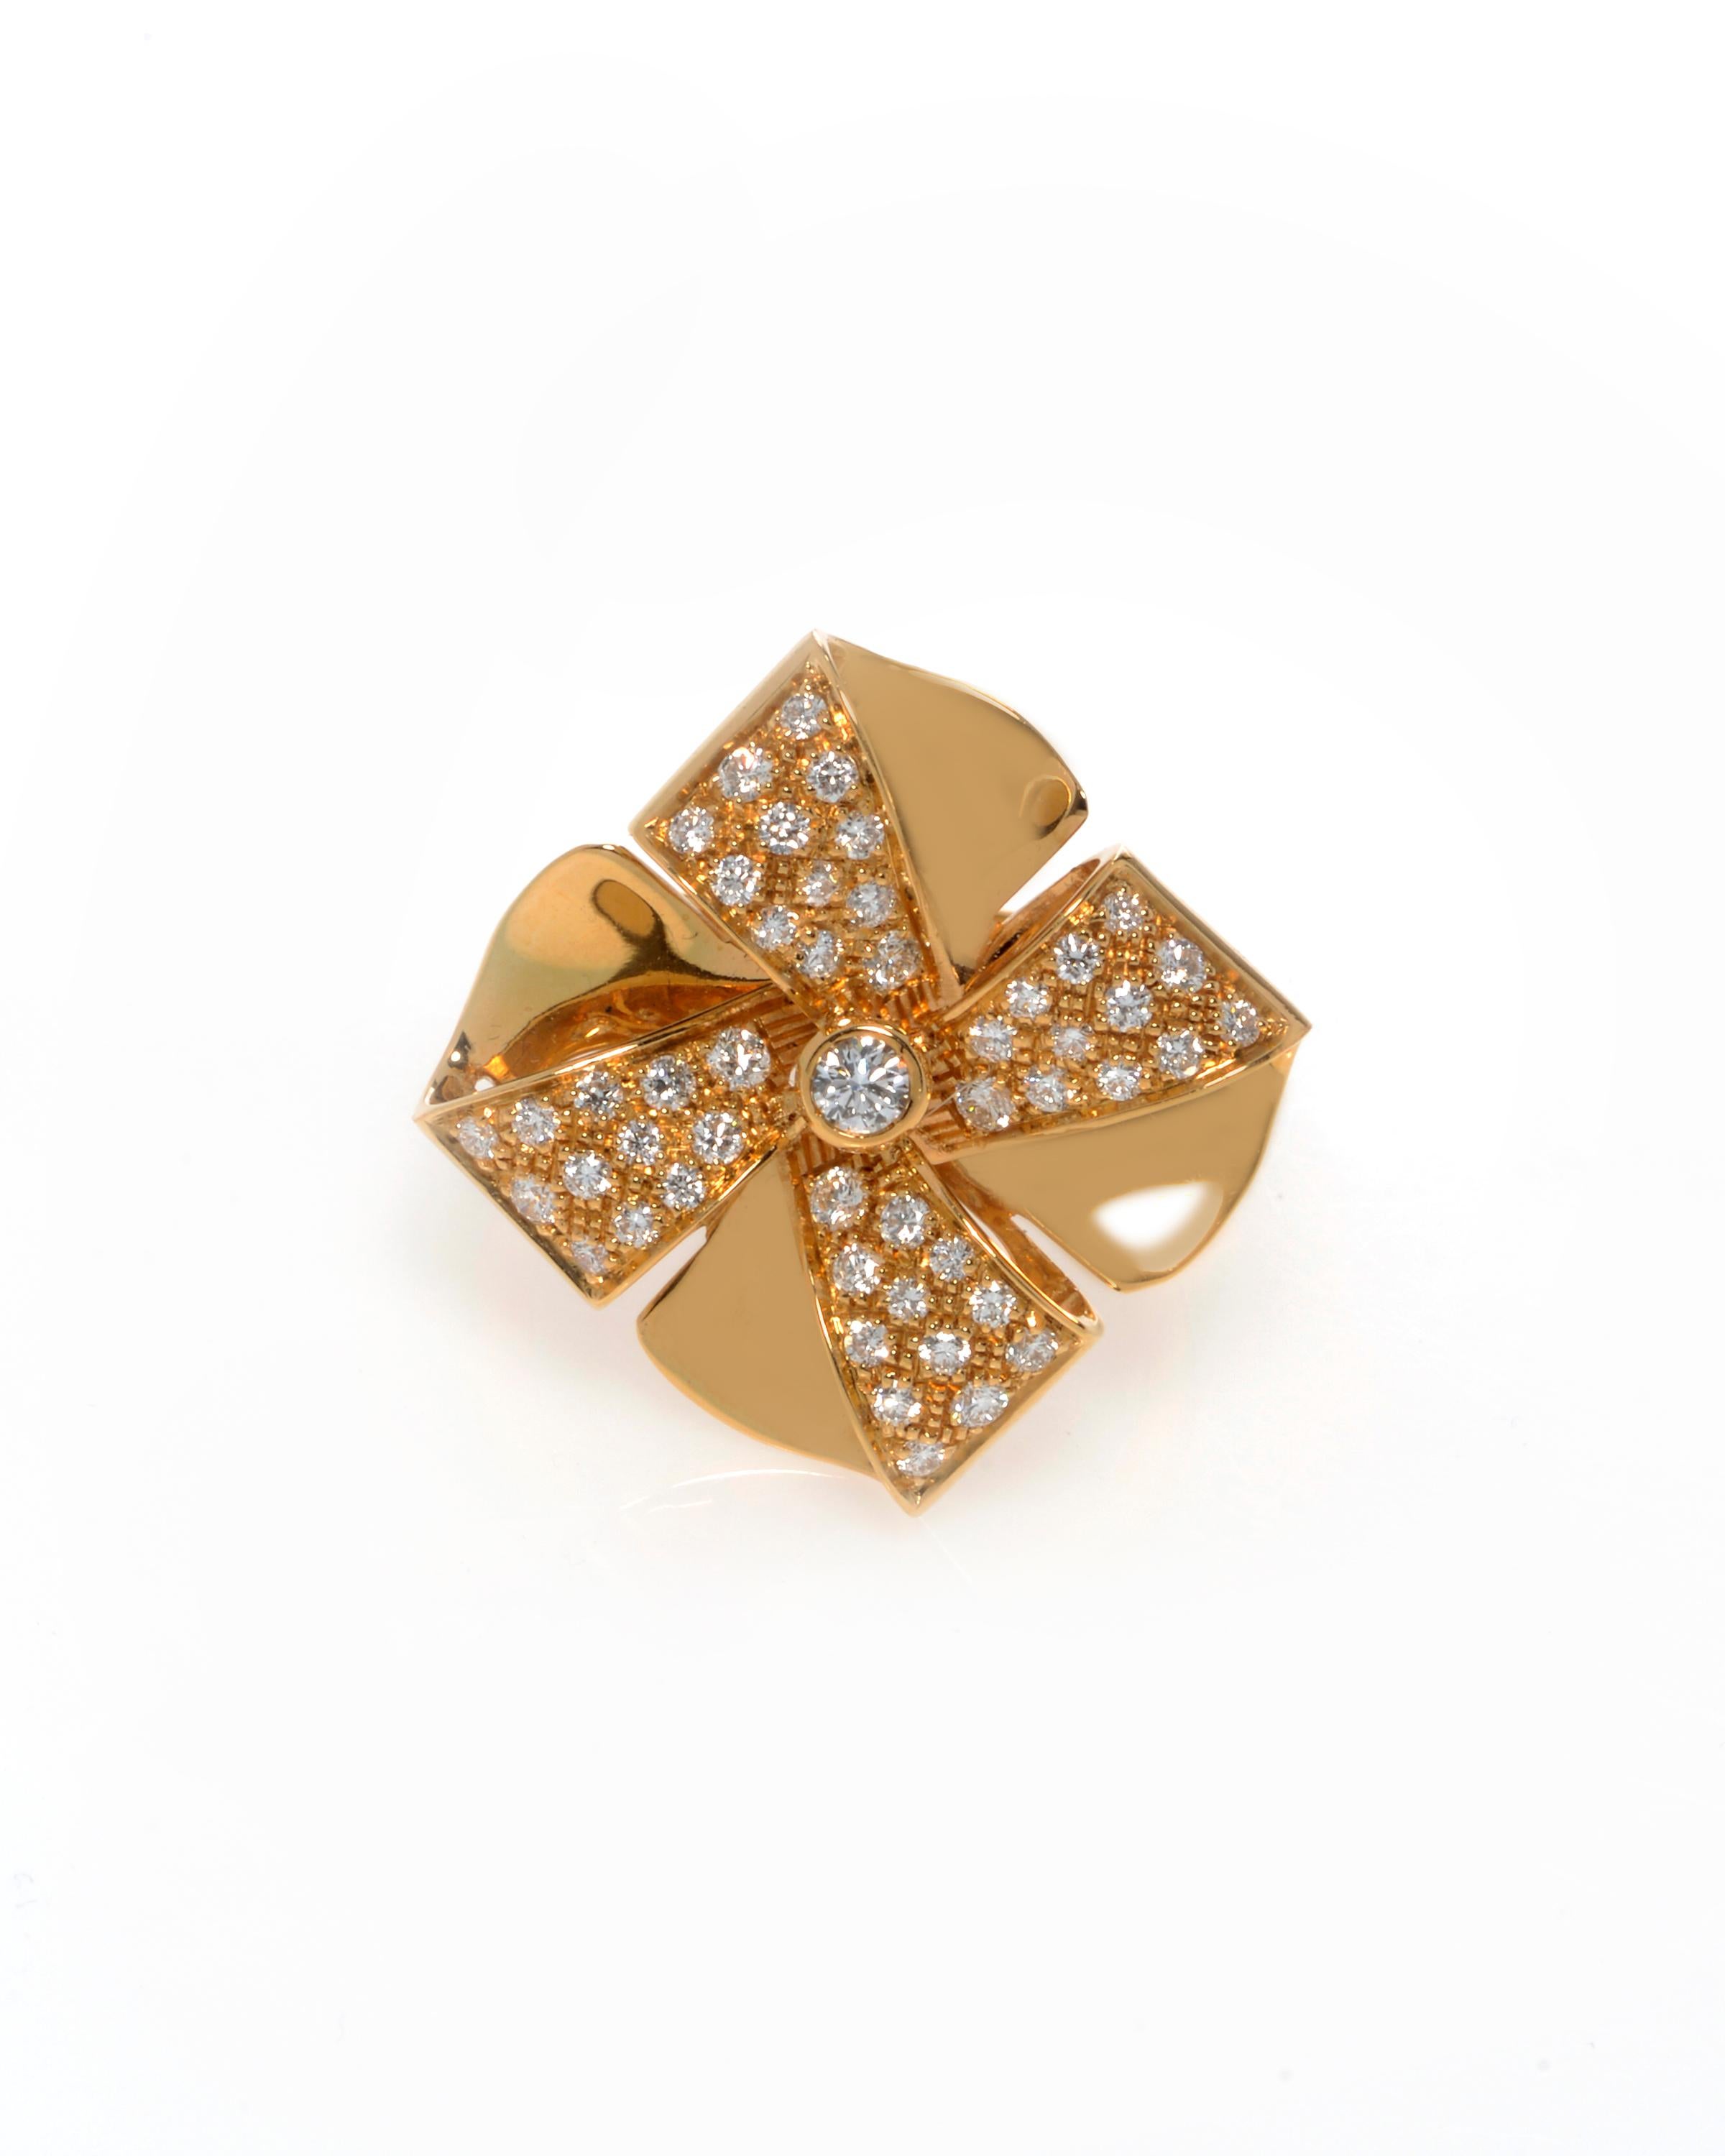 Luca Carati 18K Yellow Gold Diamond Flower Cocktail Ring. The ring is set with 0.71cttw of round cut diamonds. Diamond color G and VVS clarity. Ring size 7.5. Weight: 9.20 grams. Comes with a box and a certificate. 